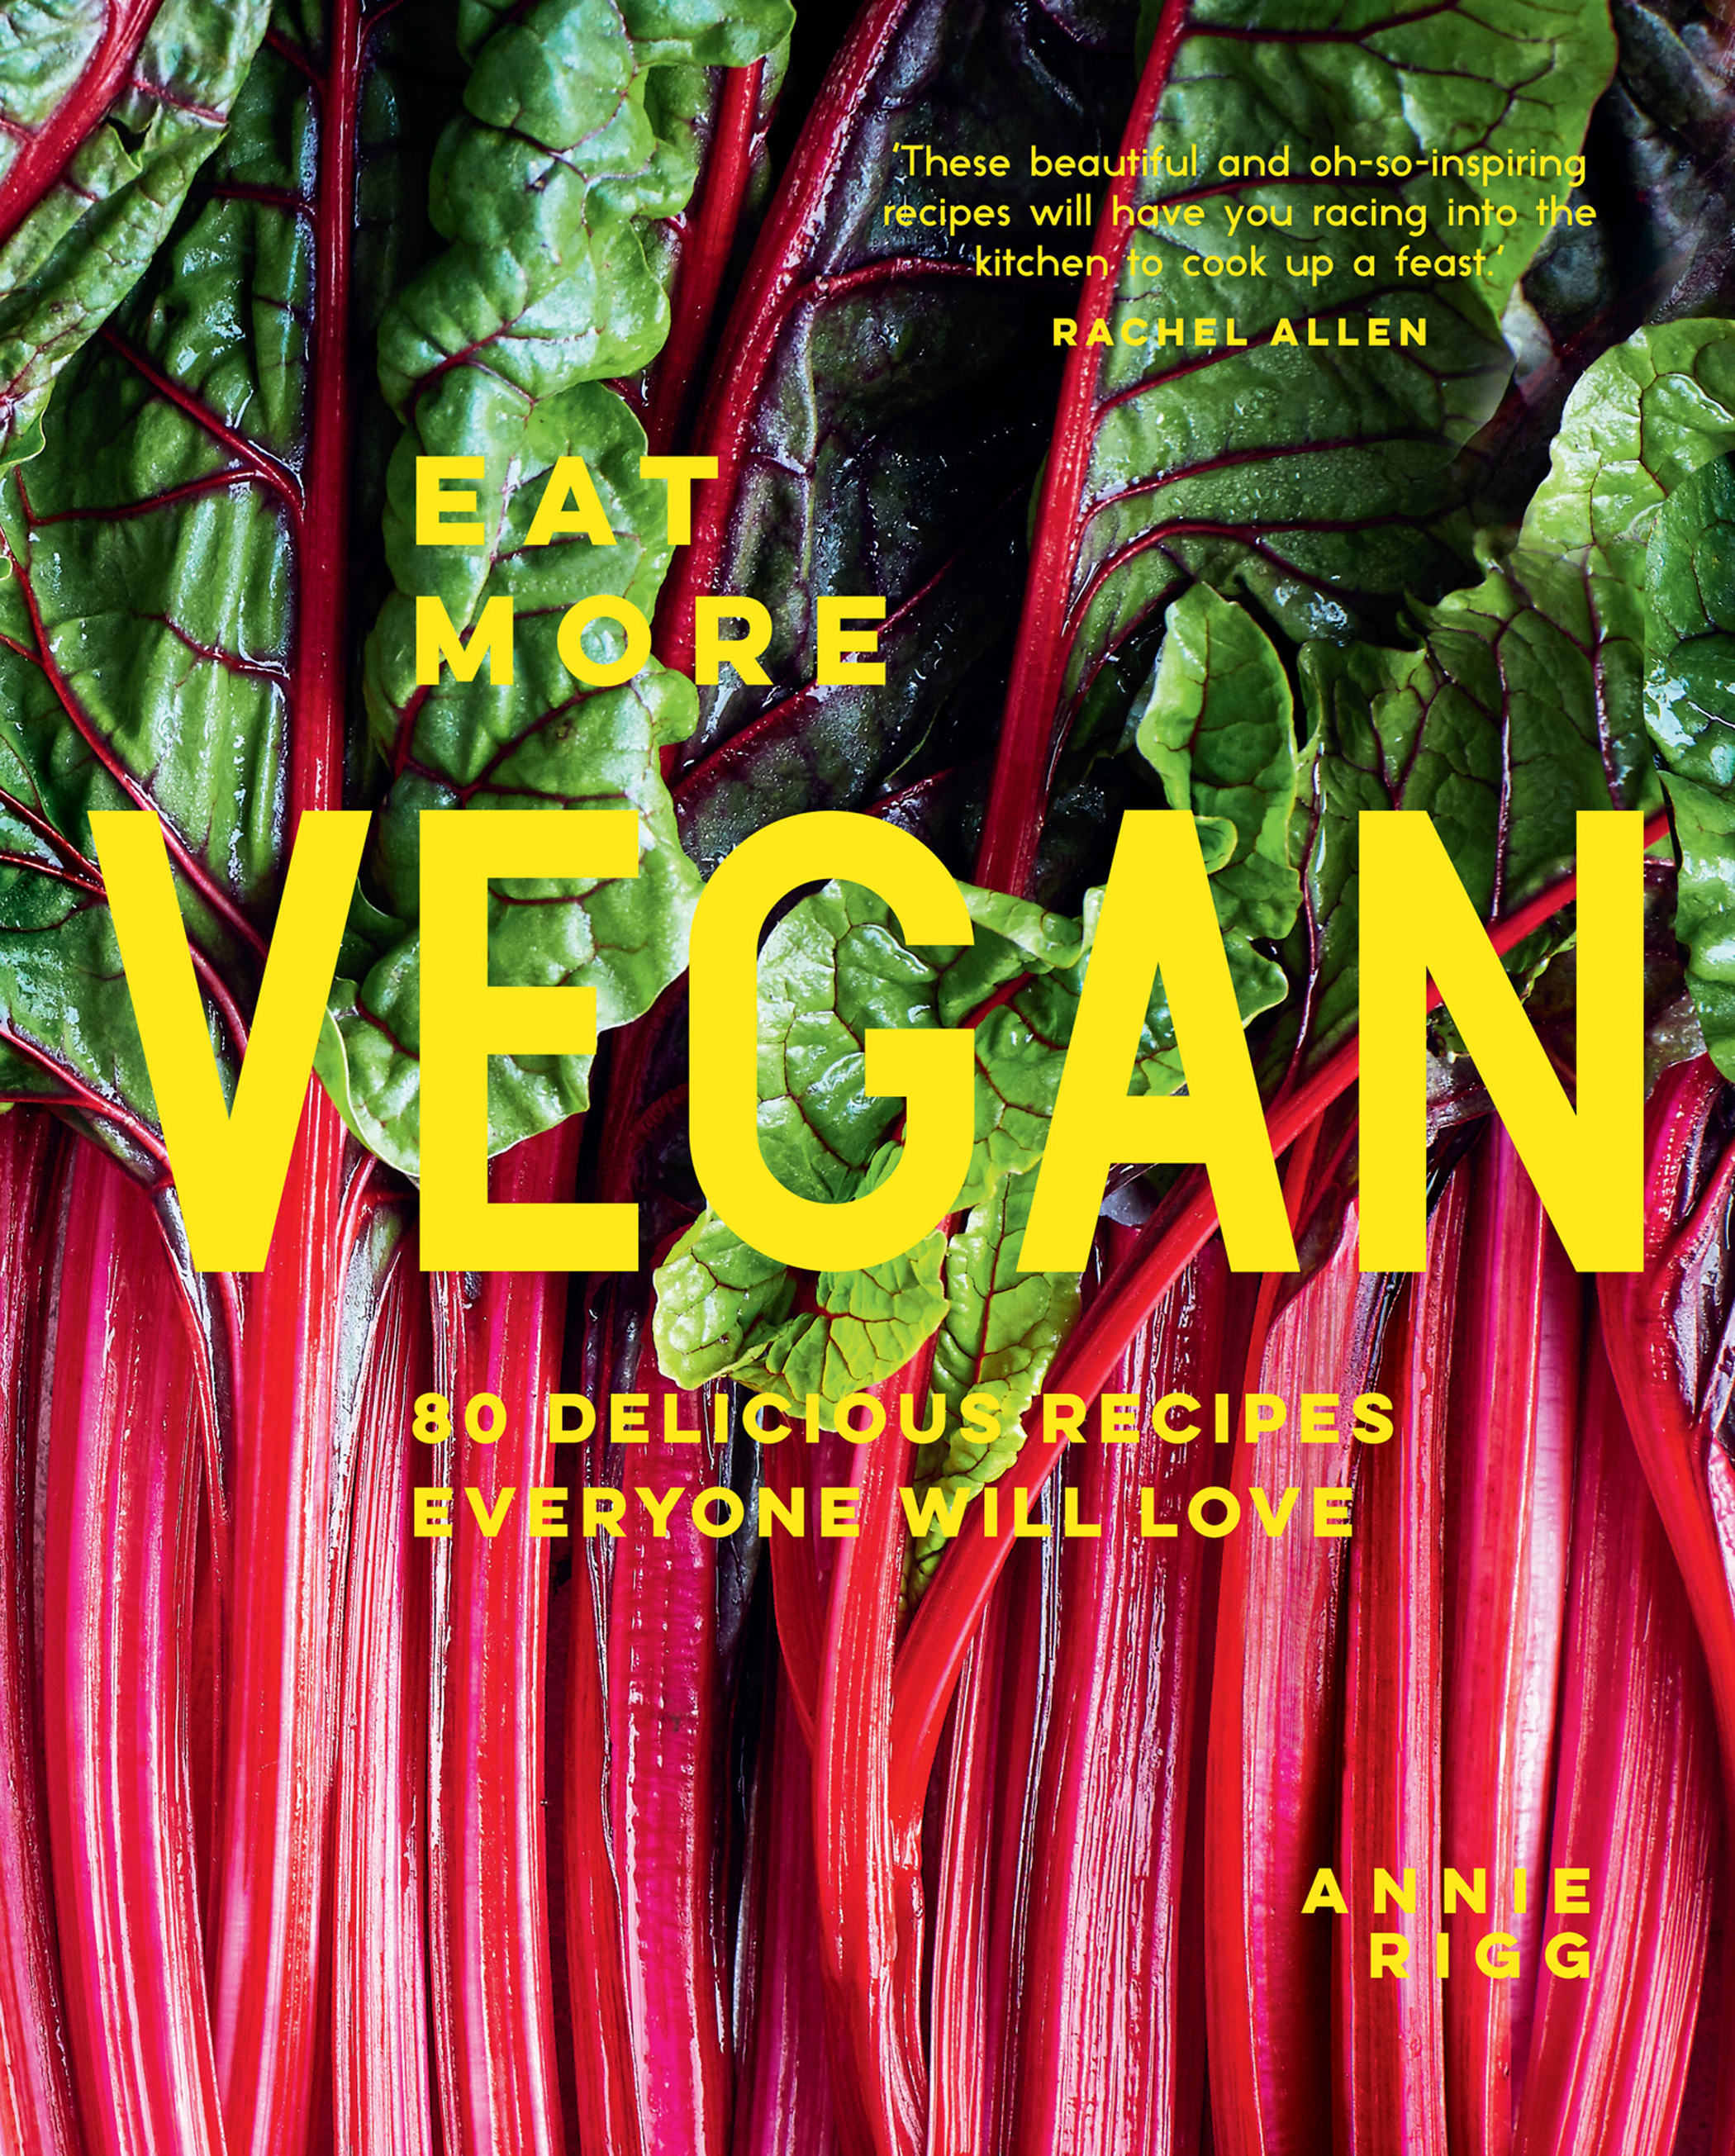 <strong>Eat More Vegan by Annie Rigg